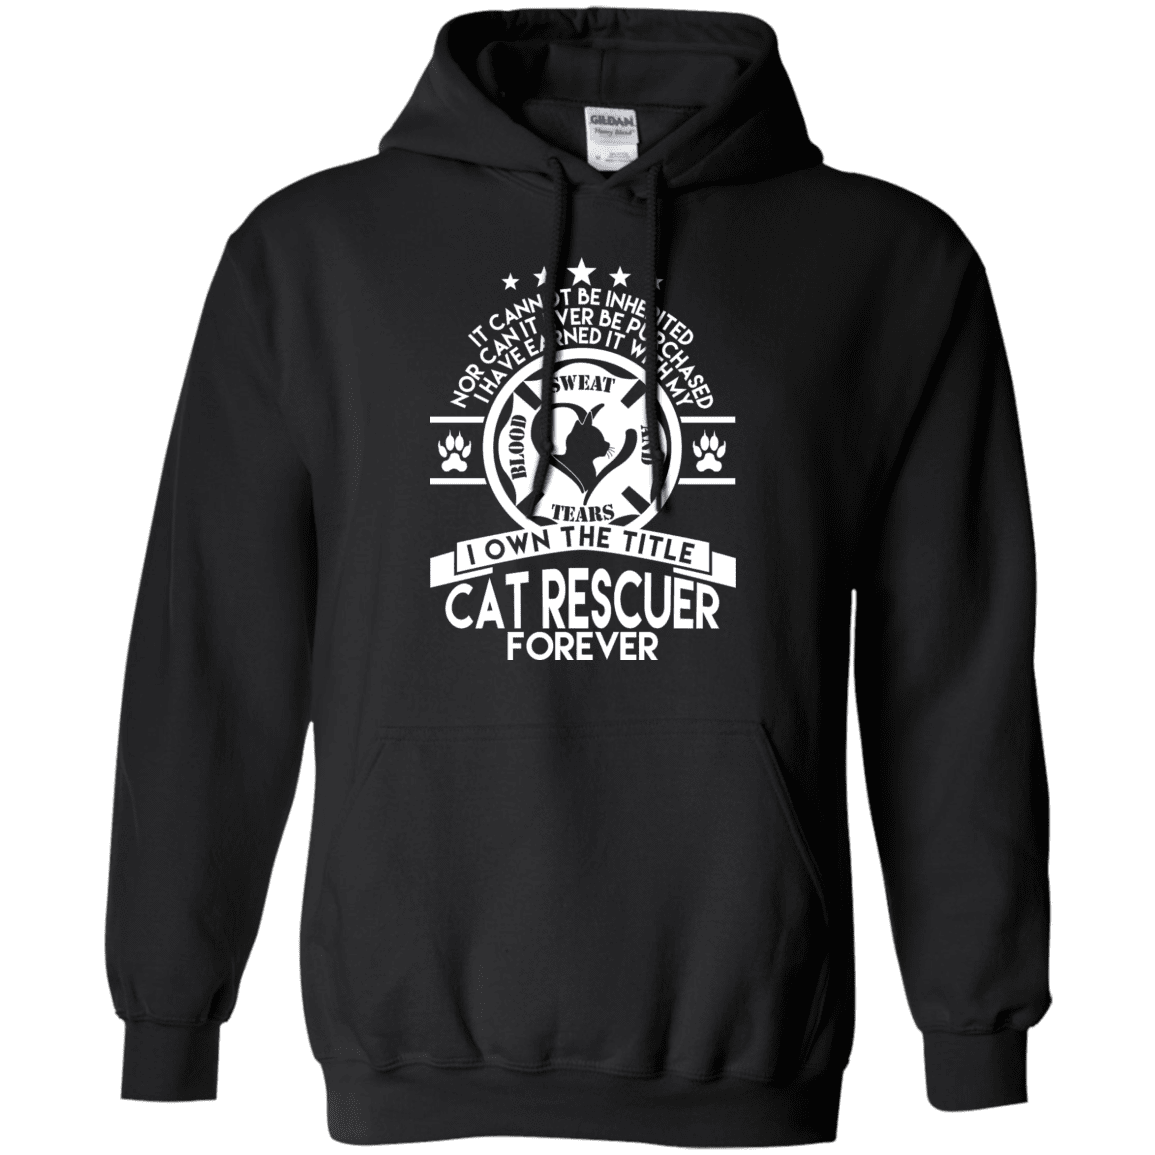 Cat Rescuer Forever - Hoodie.